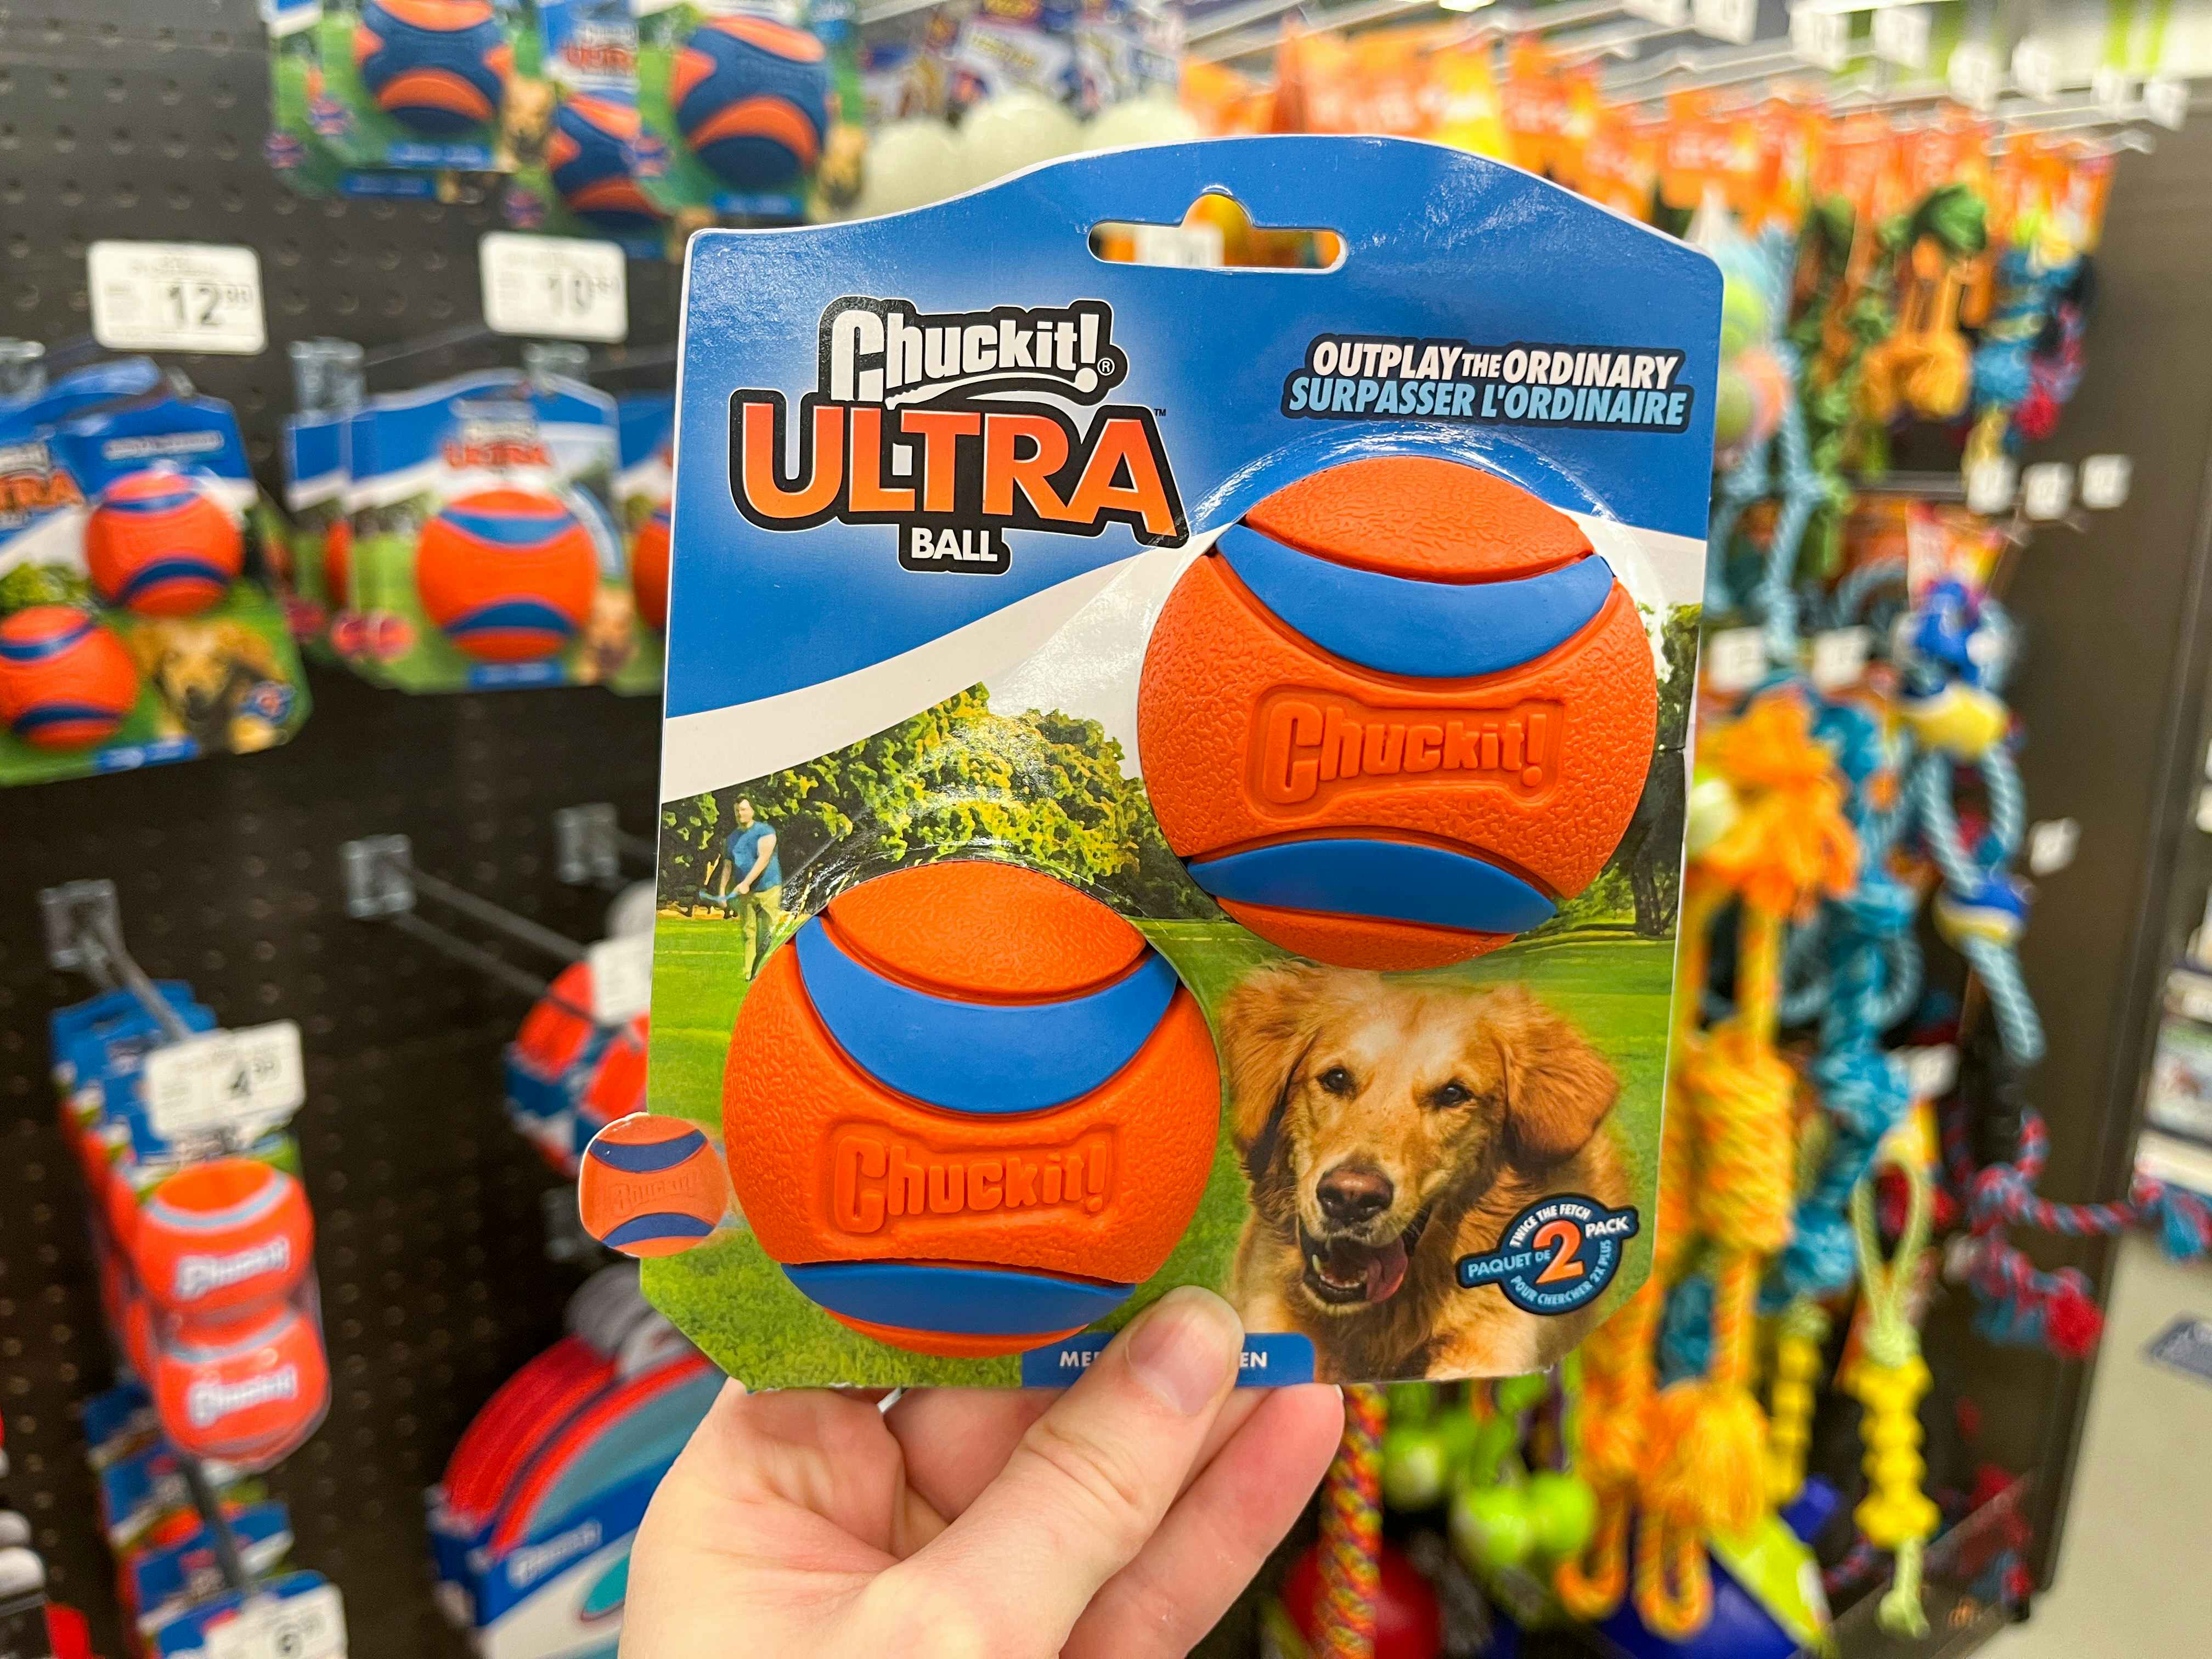 Chuckit Dog Toys, Starting at $3.60 on Amazon (Save Up to 79%)